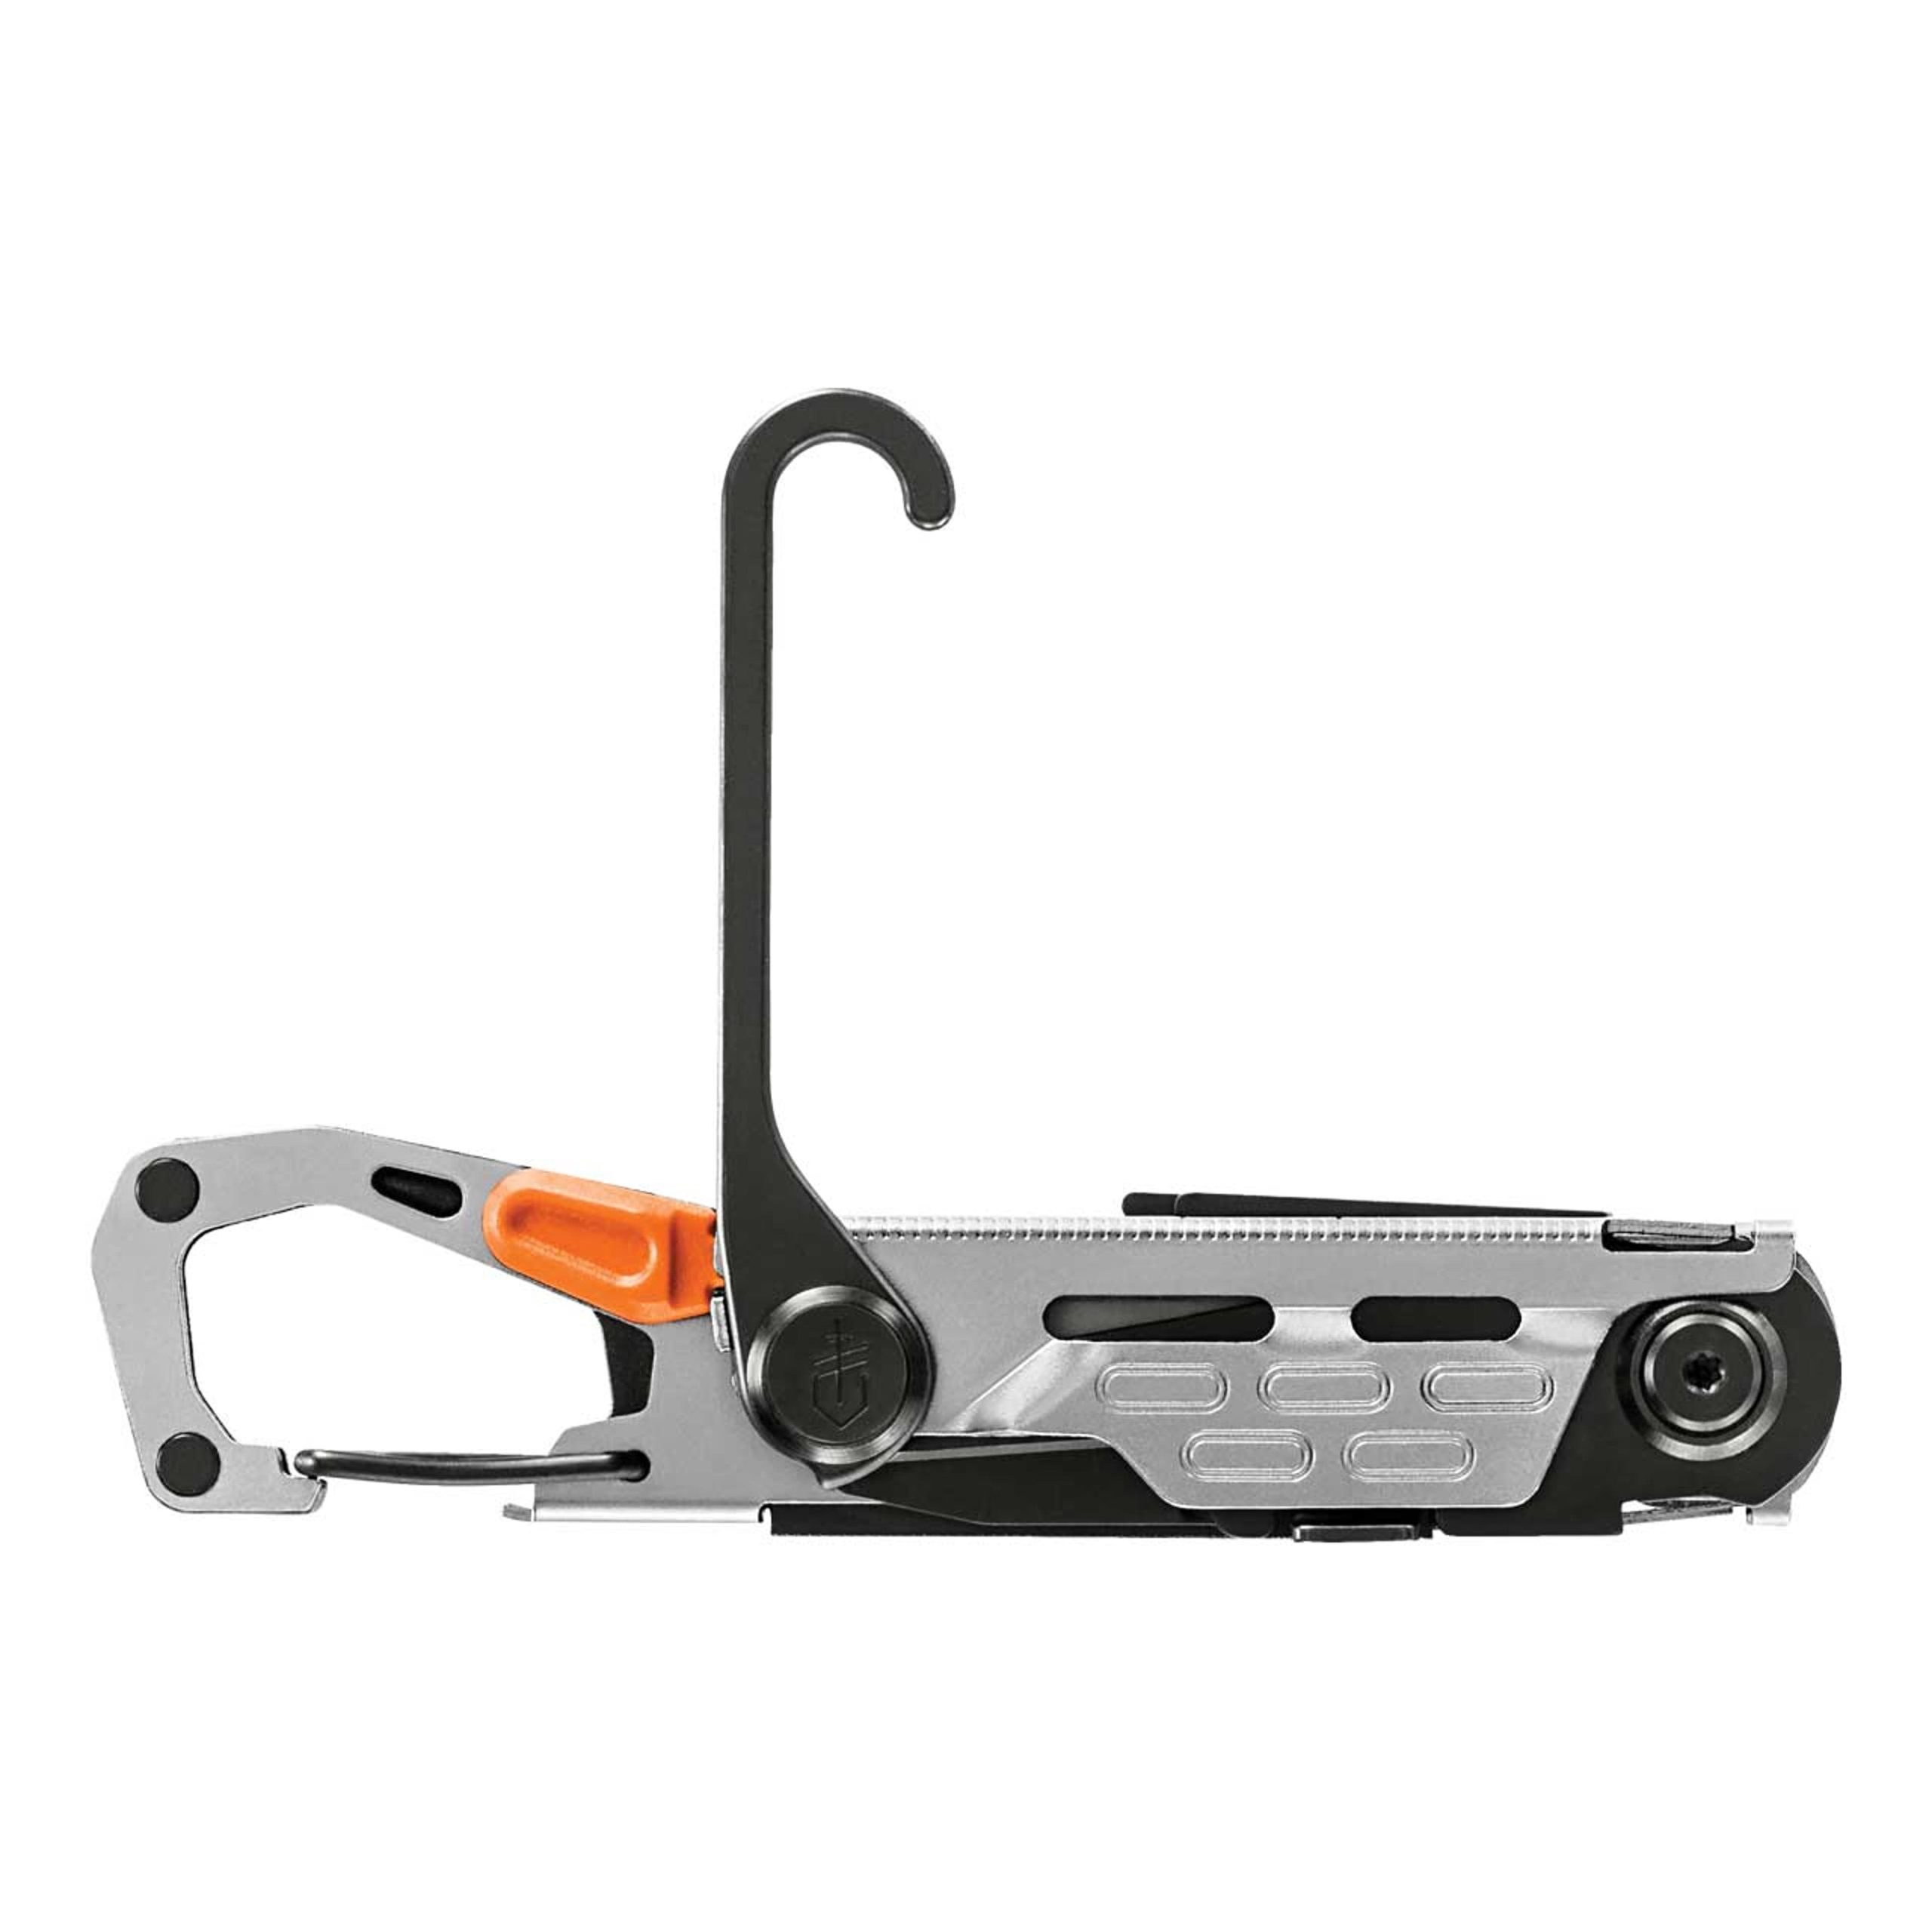 Gerber Multitool STAKEOUT